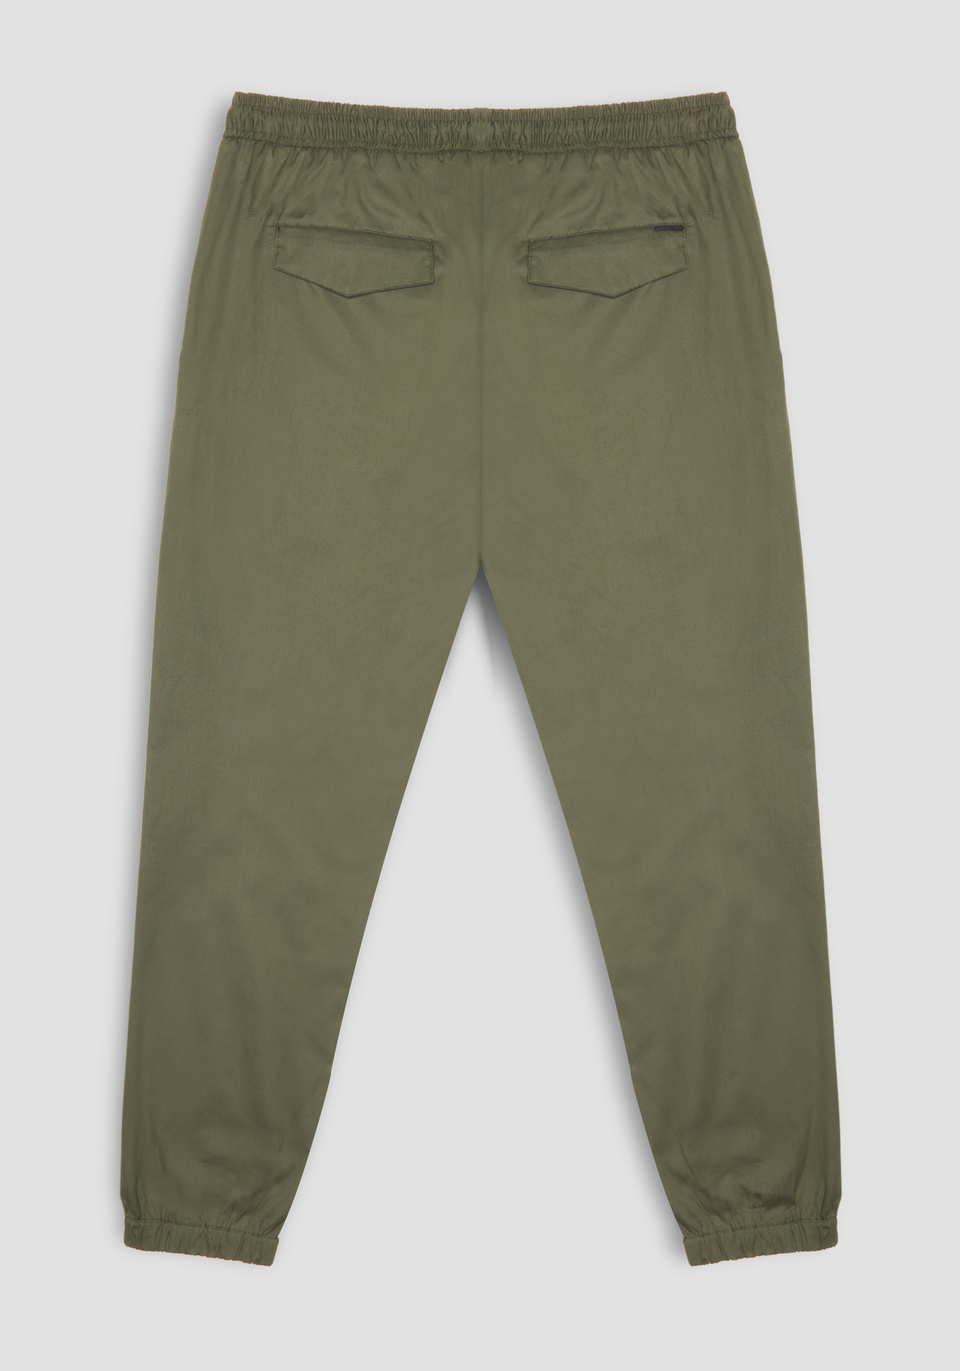 CARROT-FIT TROUSERS IN PURE COTTON WITH DRAWSTRING - Antony Morato Online Shop